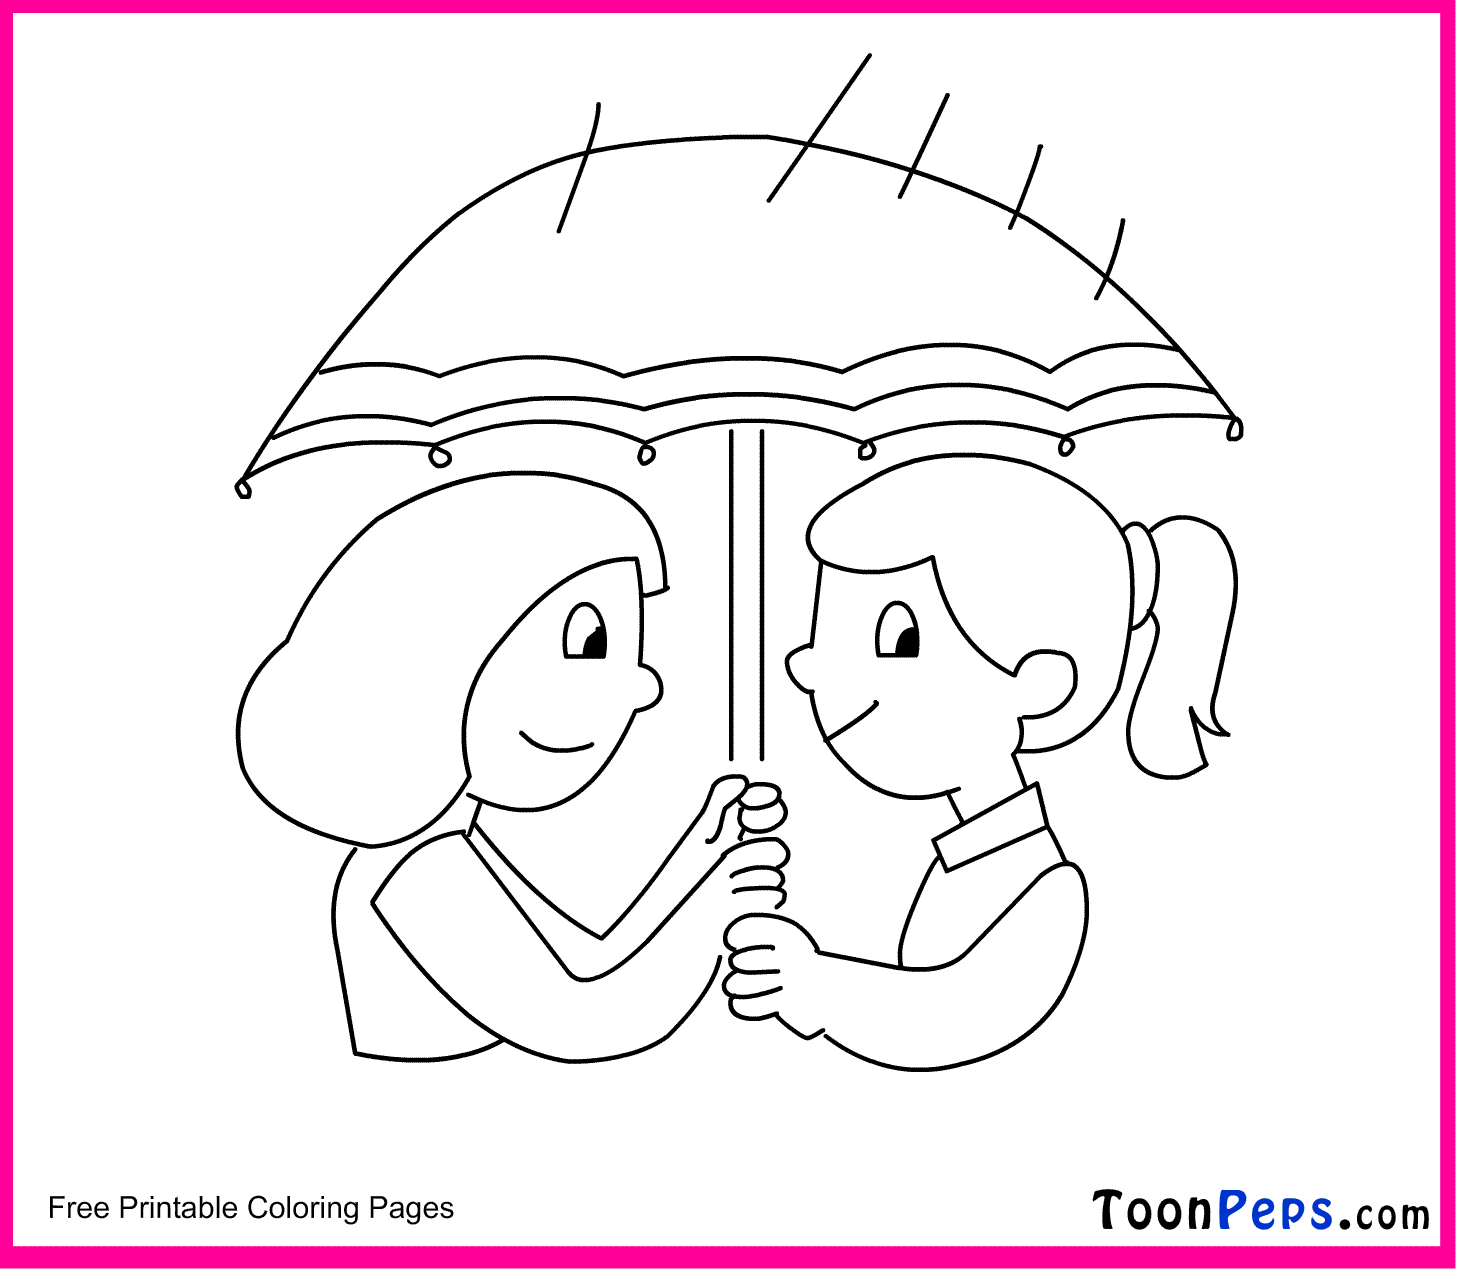 toonpeps : free printable umbrella coloring pages for kids